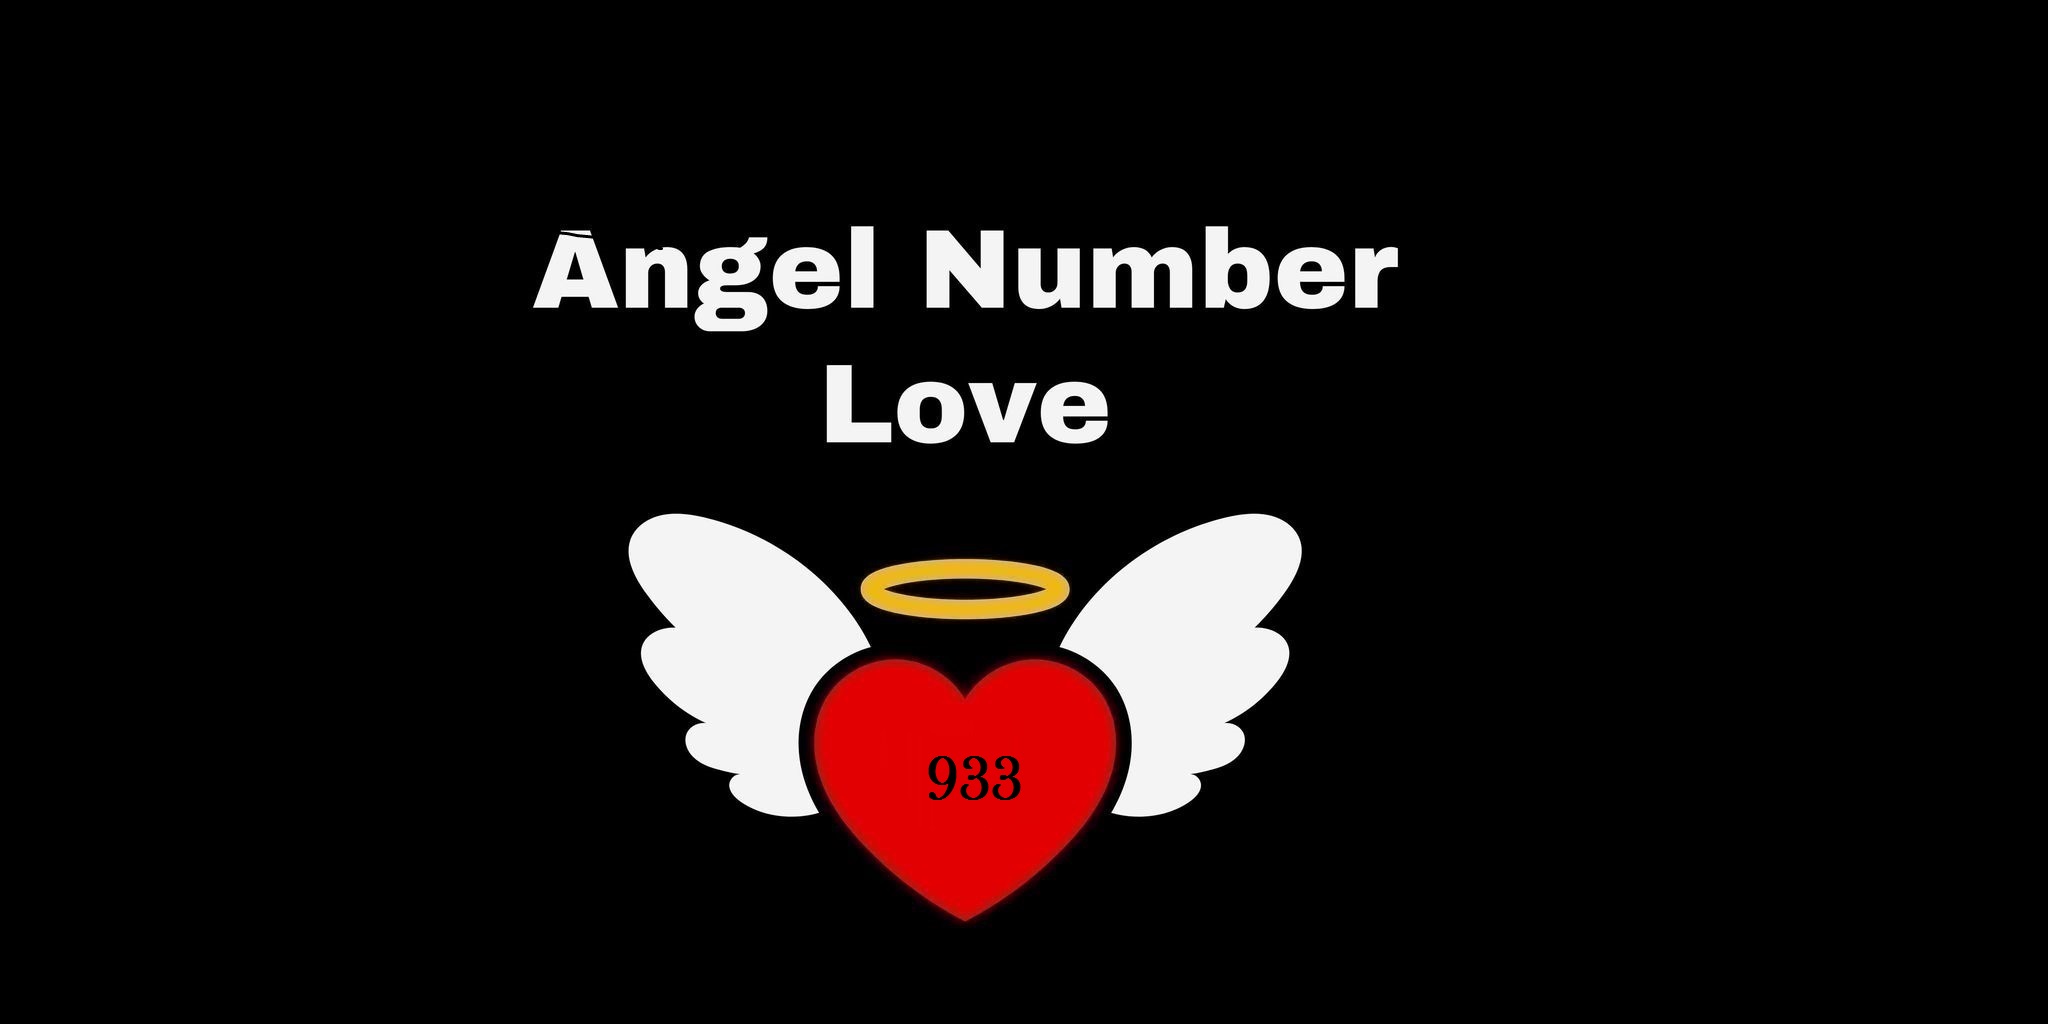 933 Angel Number Meaning In Love & Relationship